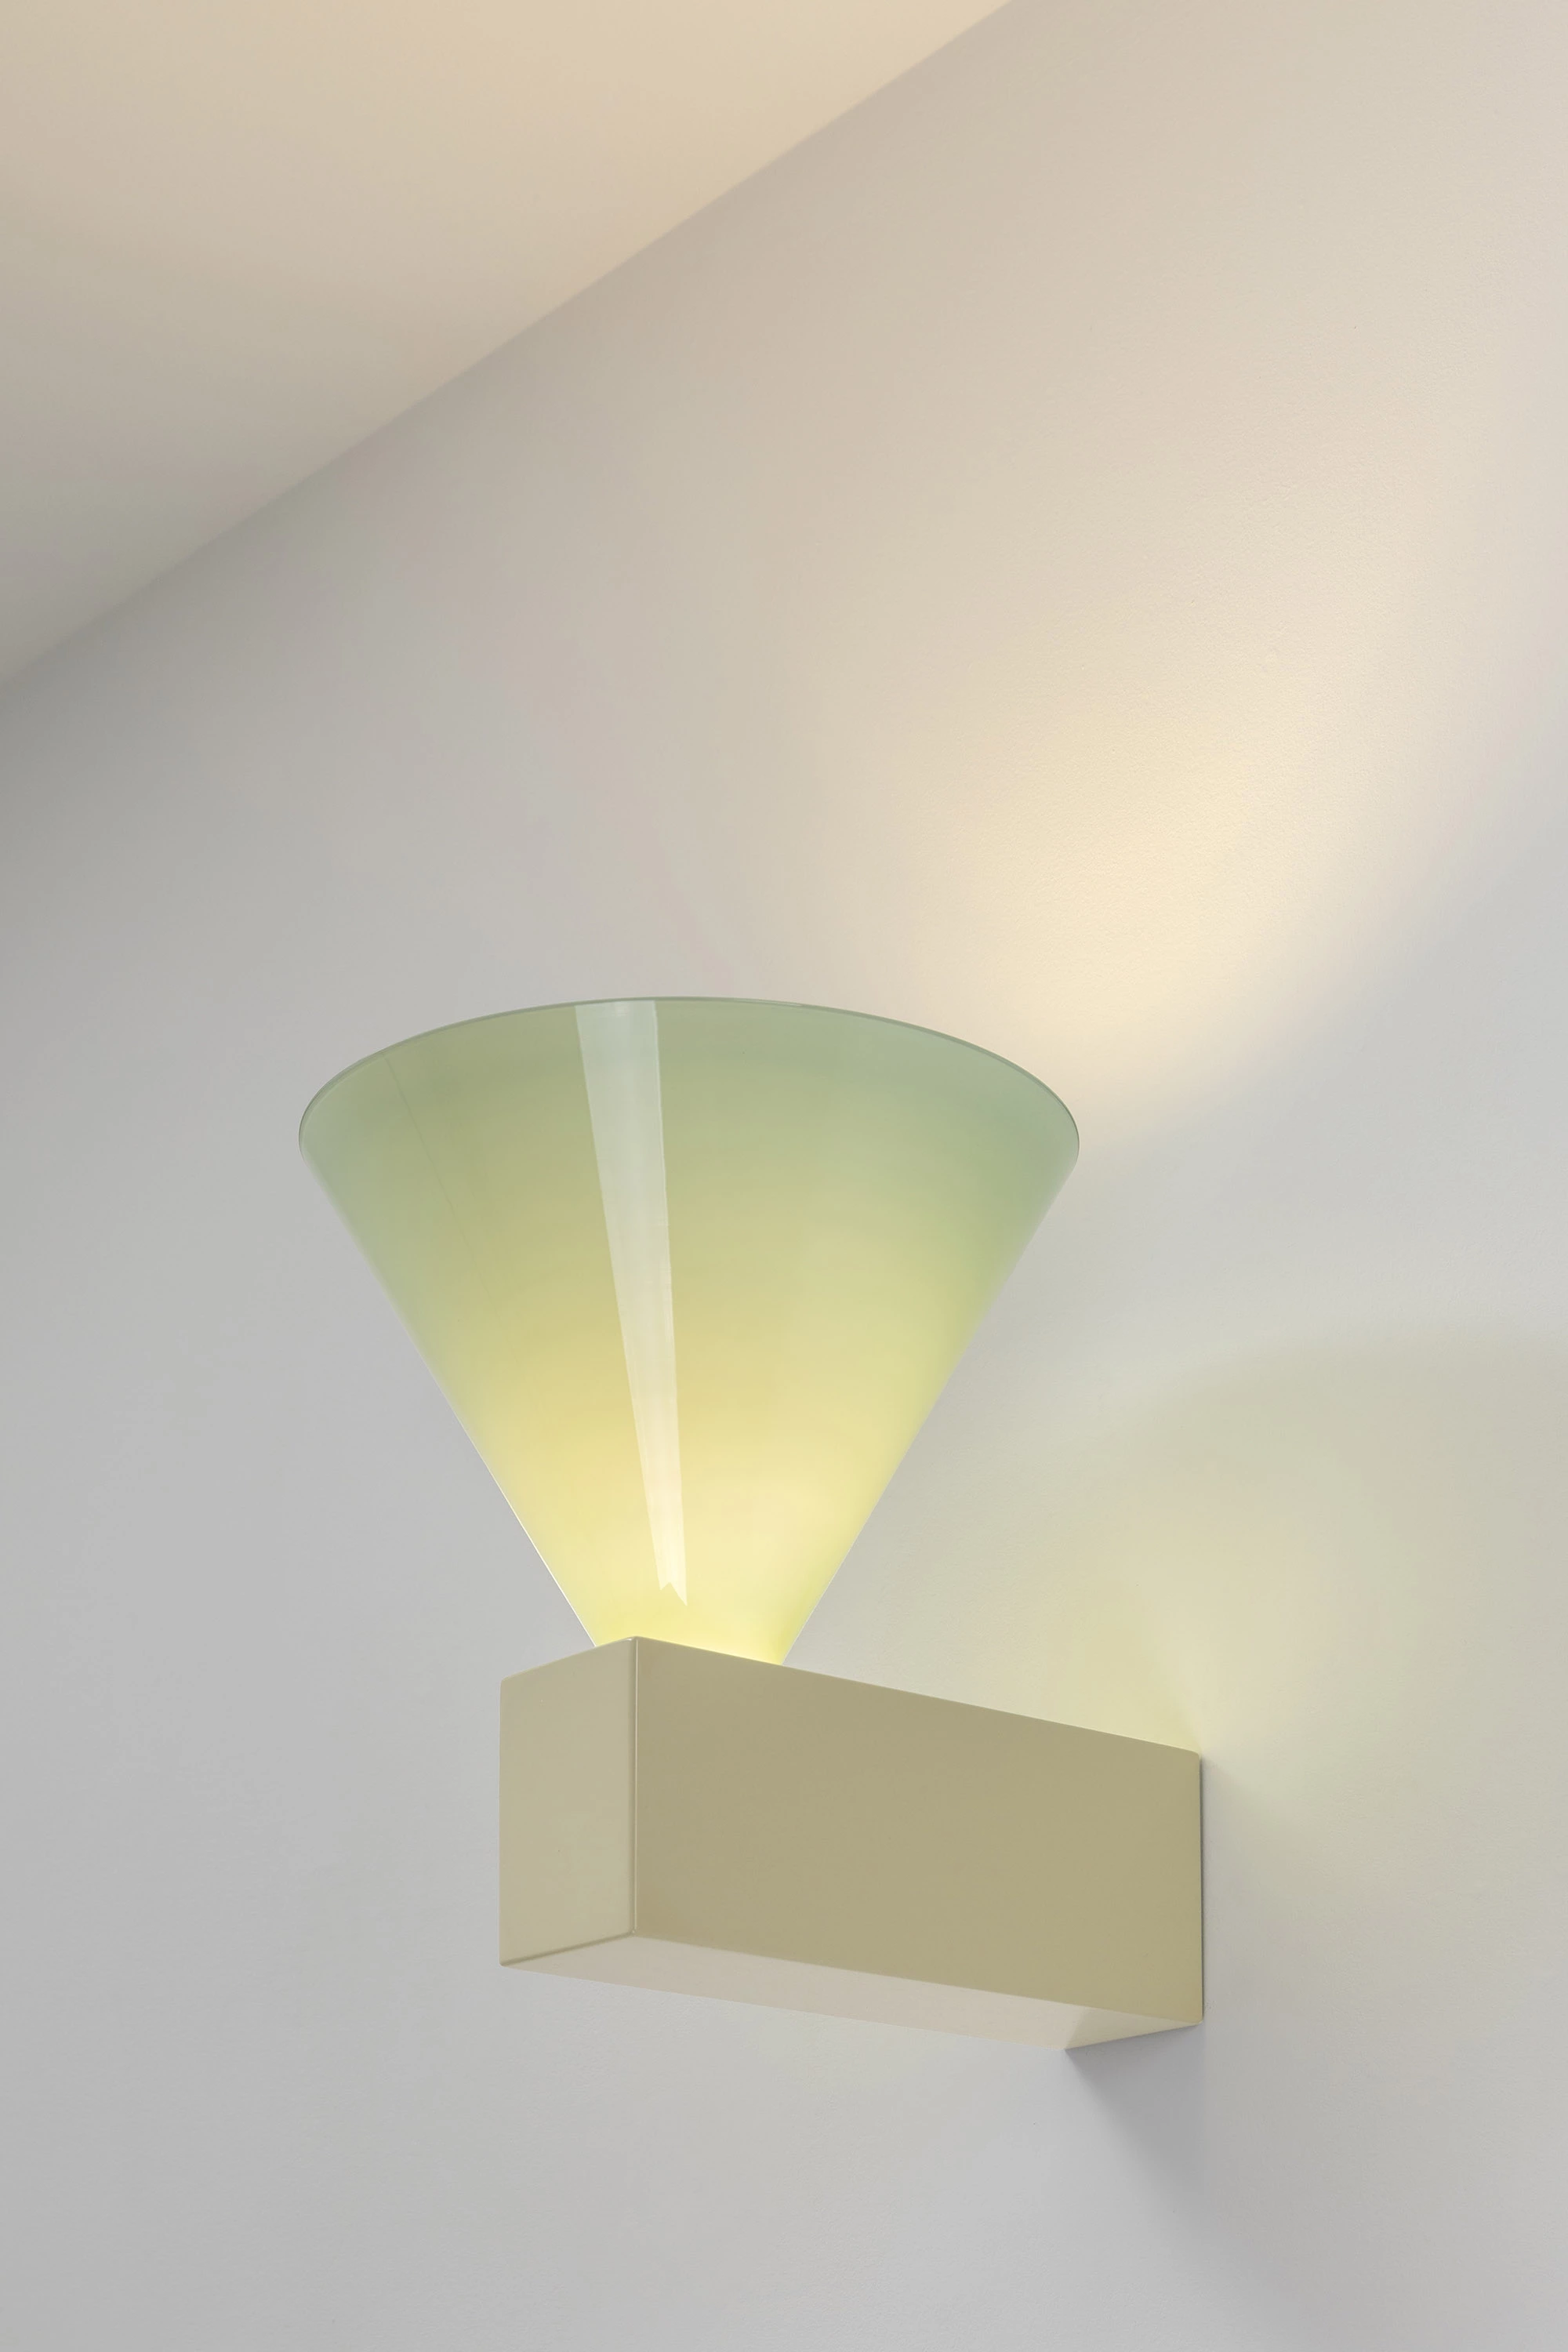 Signal W MONOCHROMATIC - Edward and Jay Barber and Osgerby - Wall light - Galerie kreo